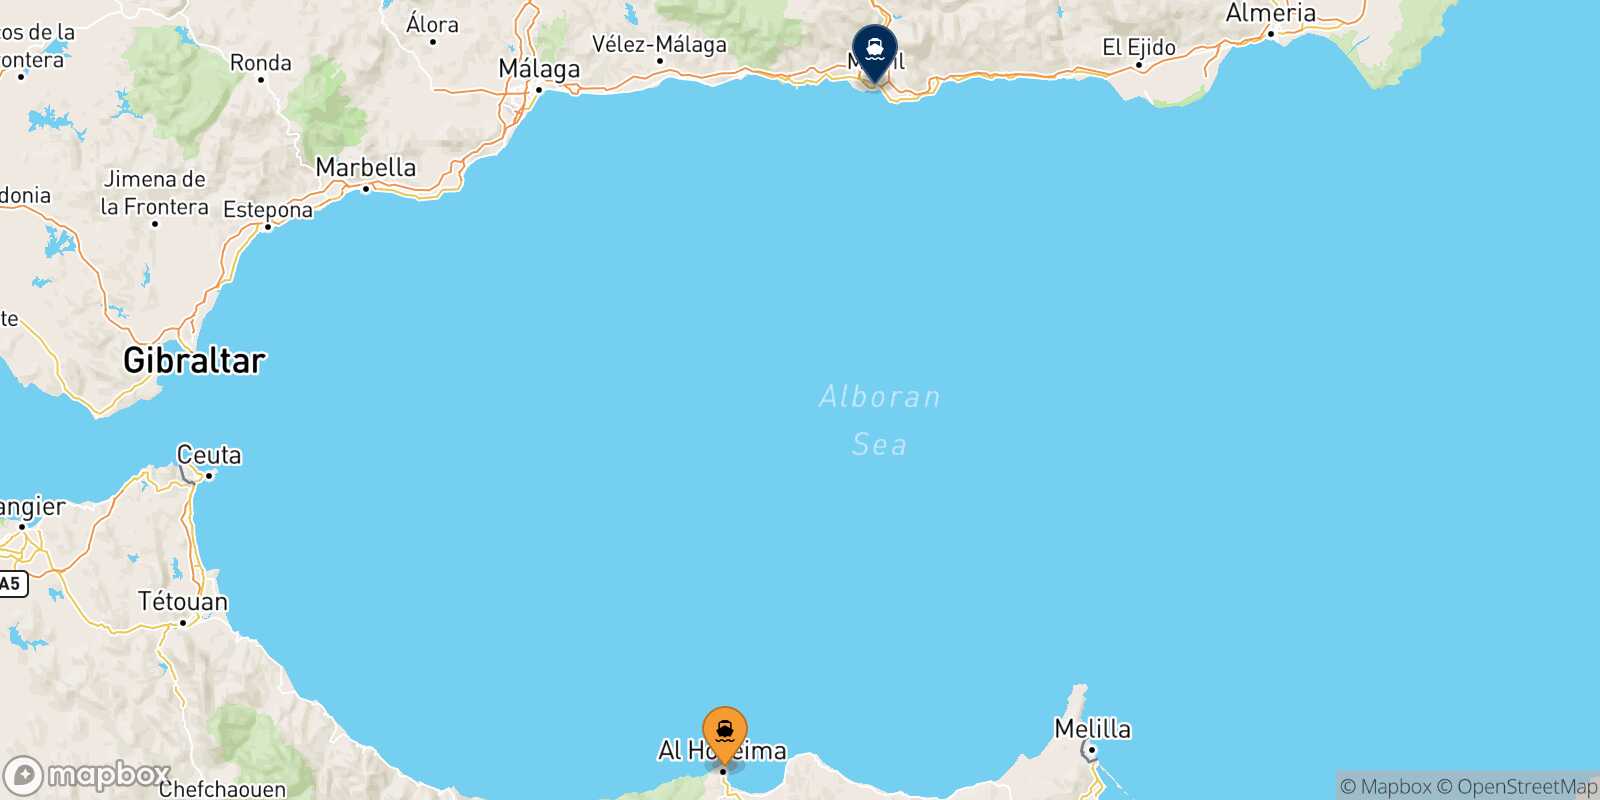 Map of the destinations reachable from Al Hoceima